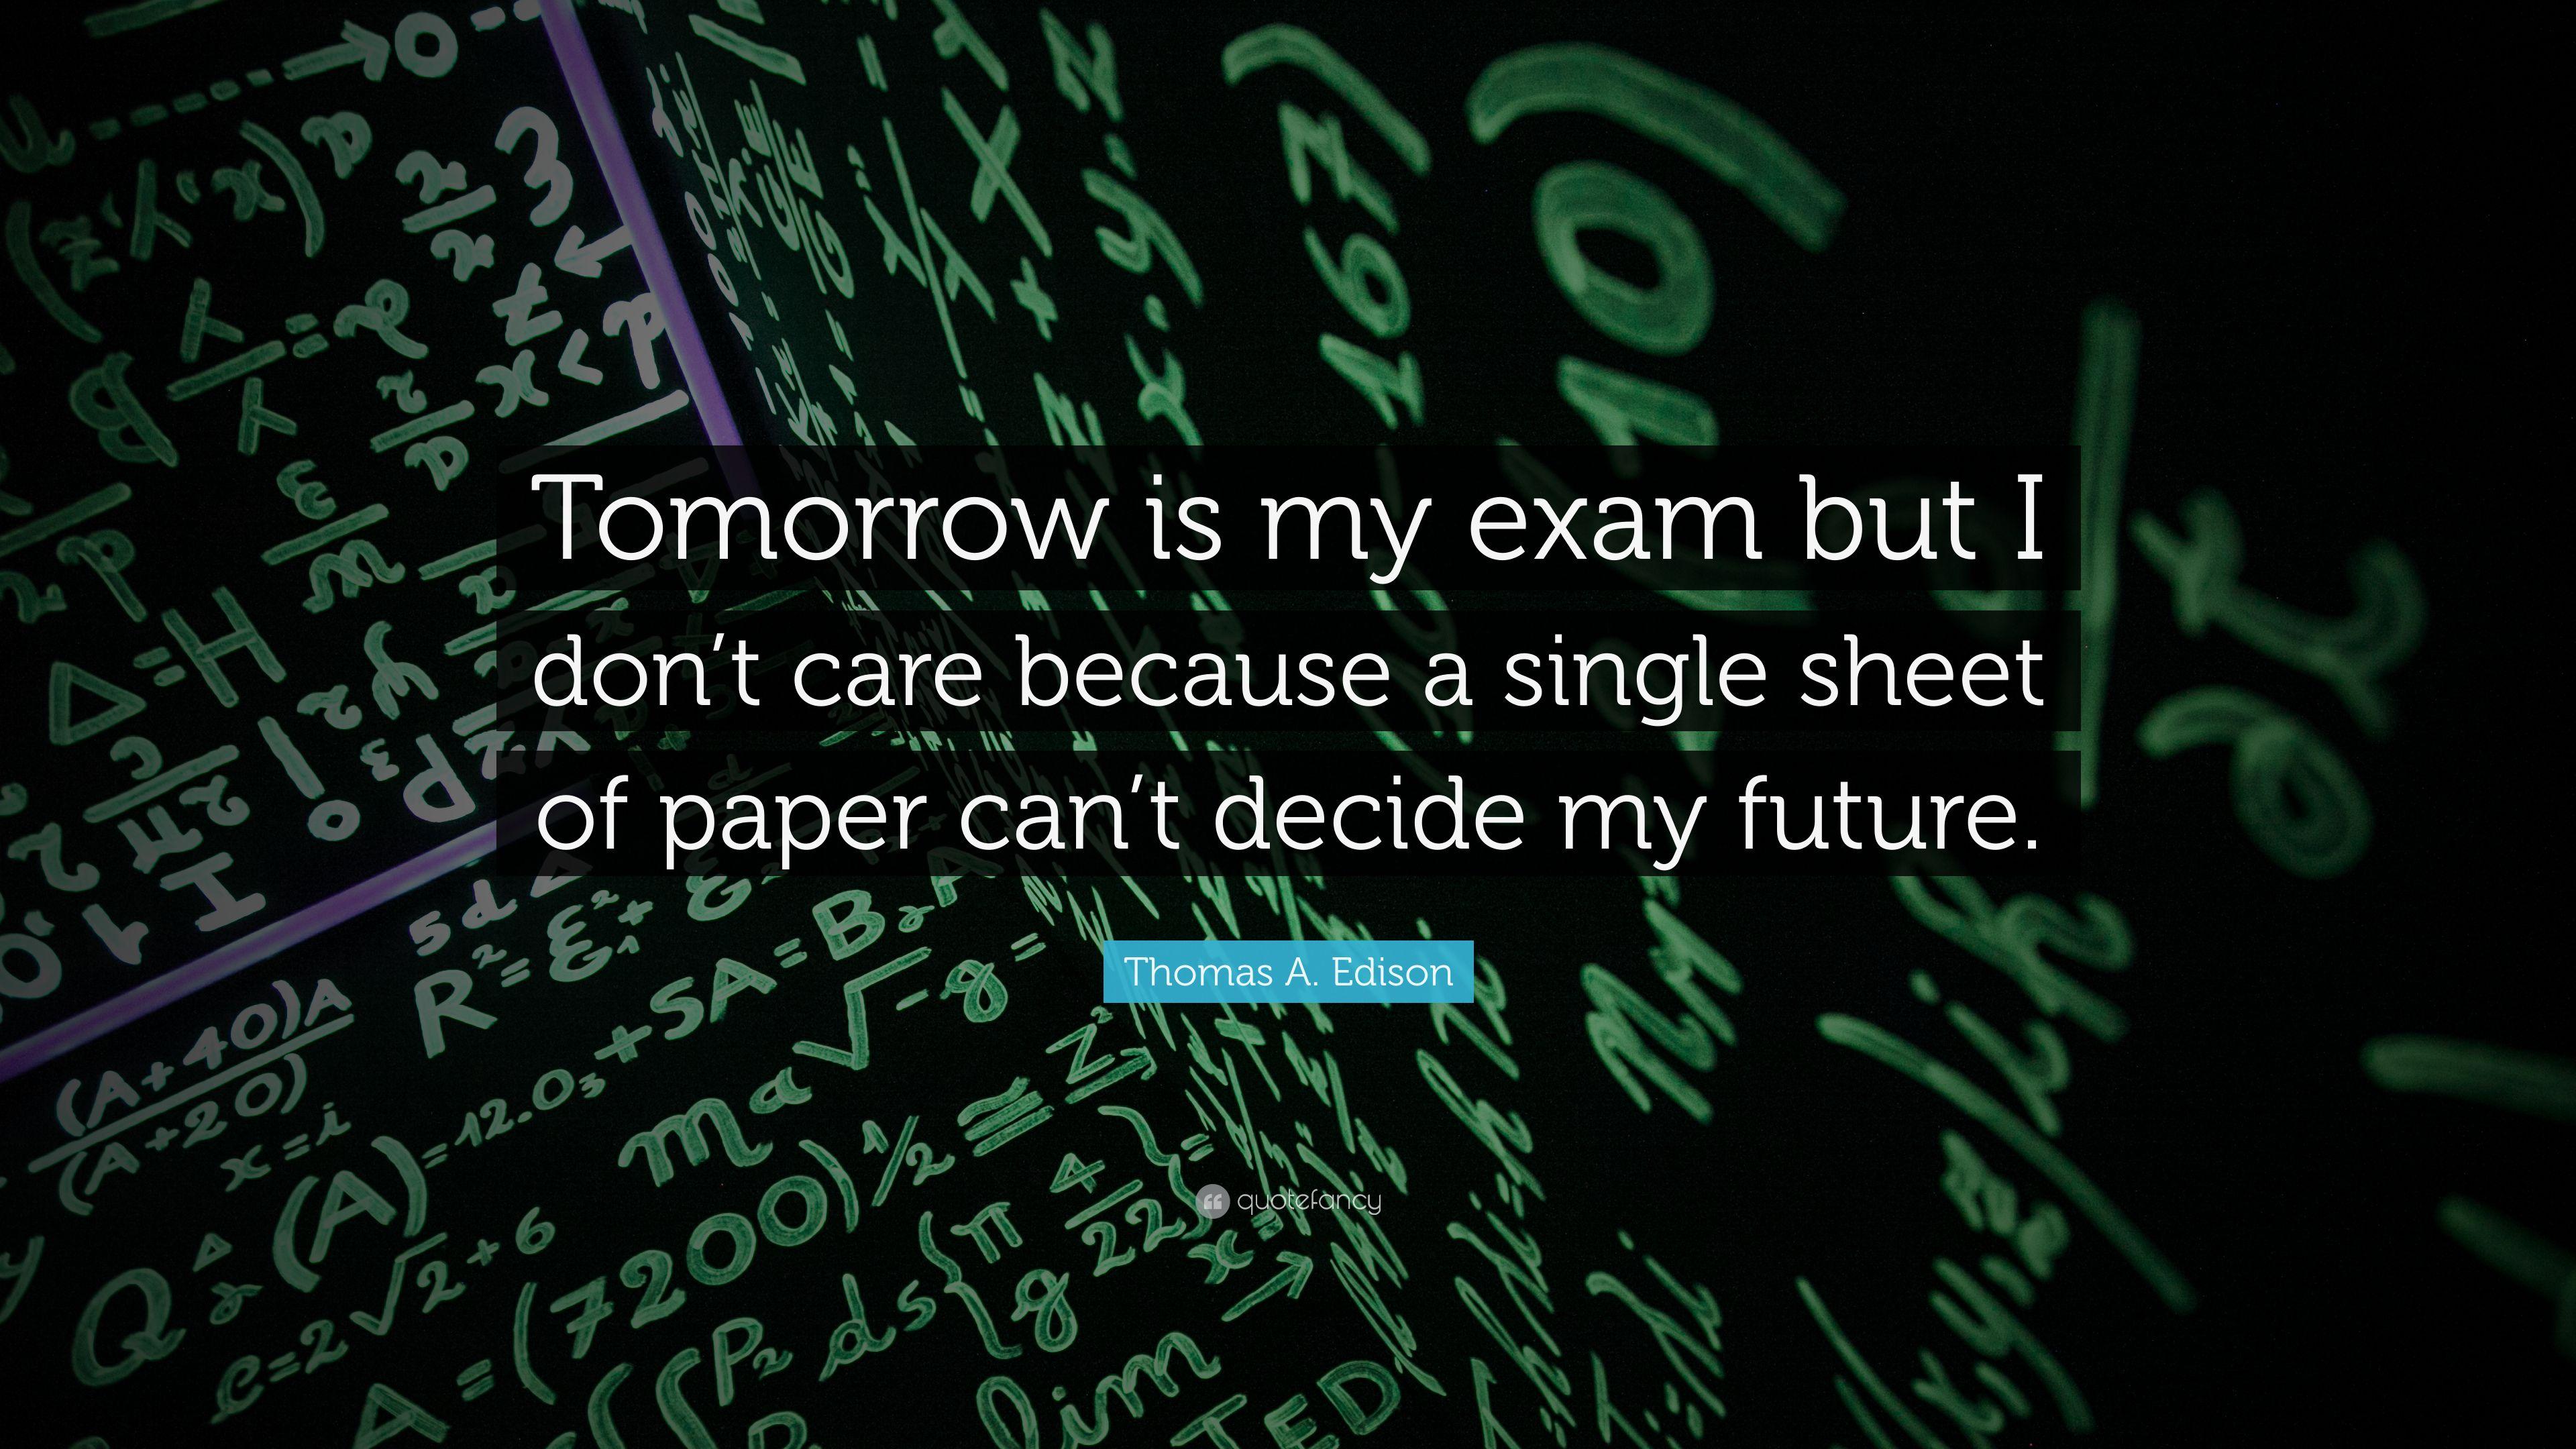 Thomas A. Edison Quote: “Tomorrow is my exam but I don't care because a single sheet of paper can't decide my future.” (24 wallpaper)